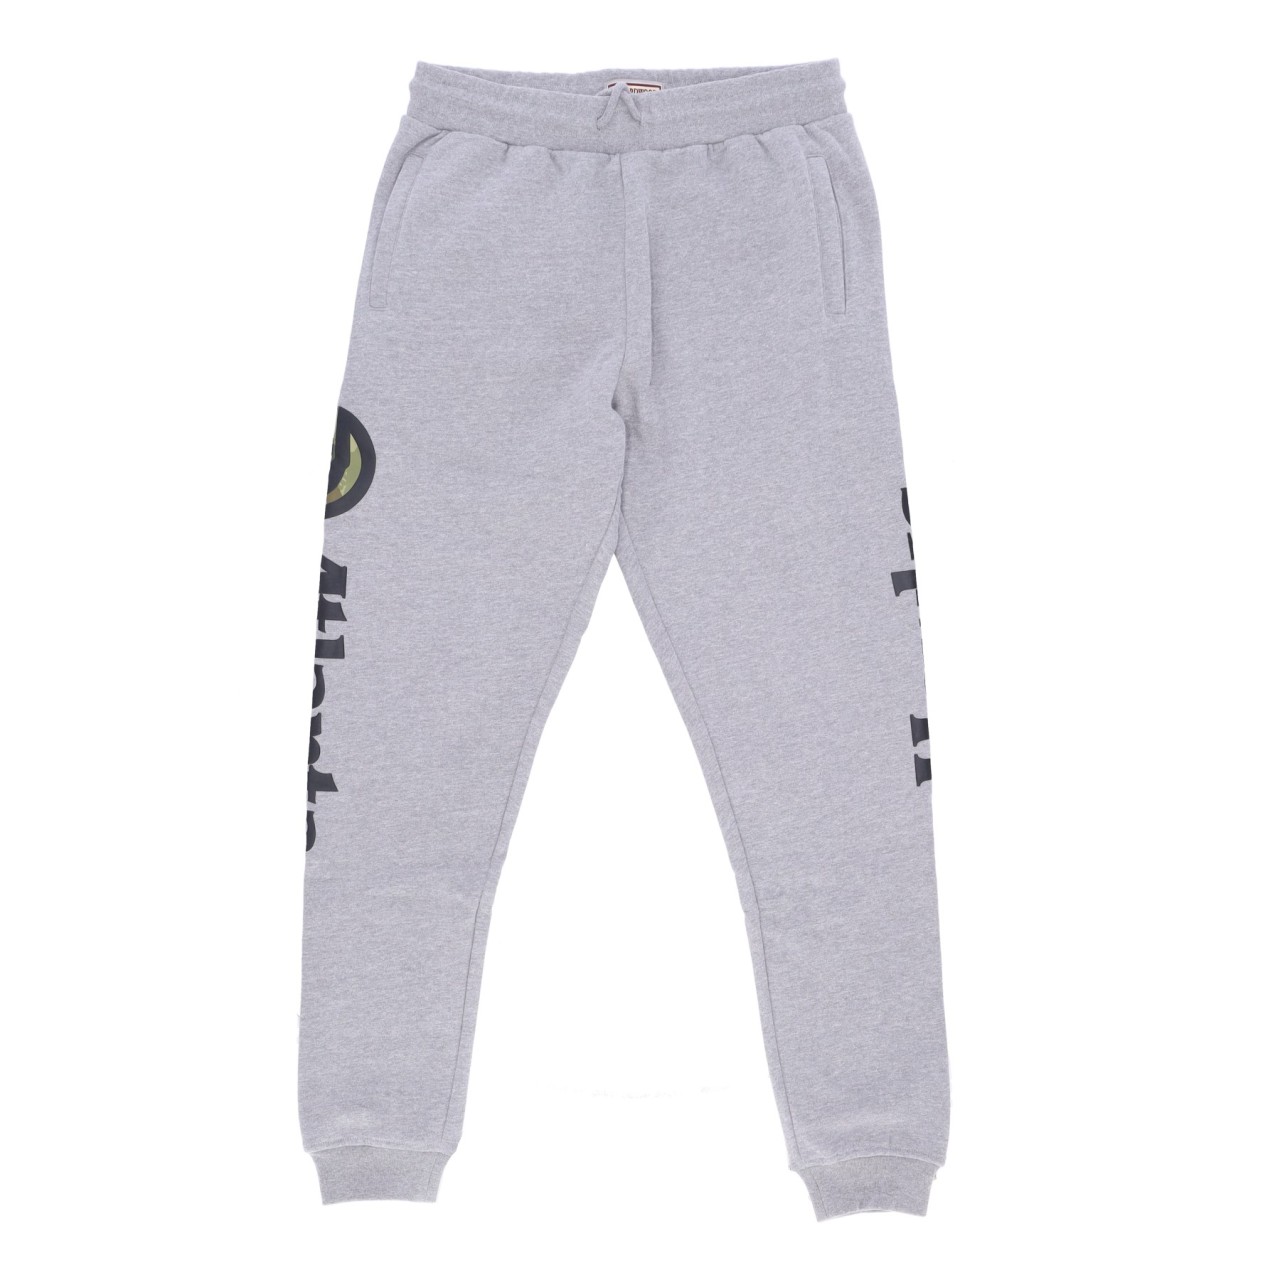 MITCHELL & NESS NBA GHOST GREEN CAMO SWEATPANTS HARDWOOD CLASSICS ATLHAW PSWP4366-AHAYYPPPGYHT